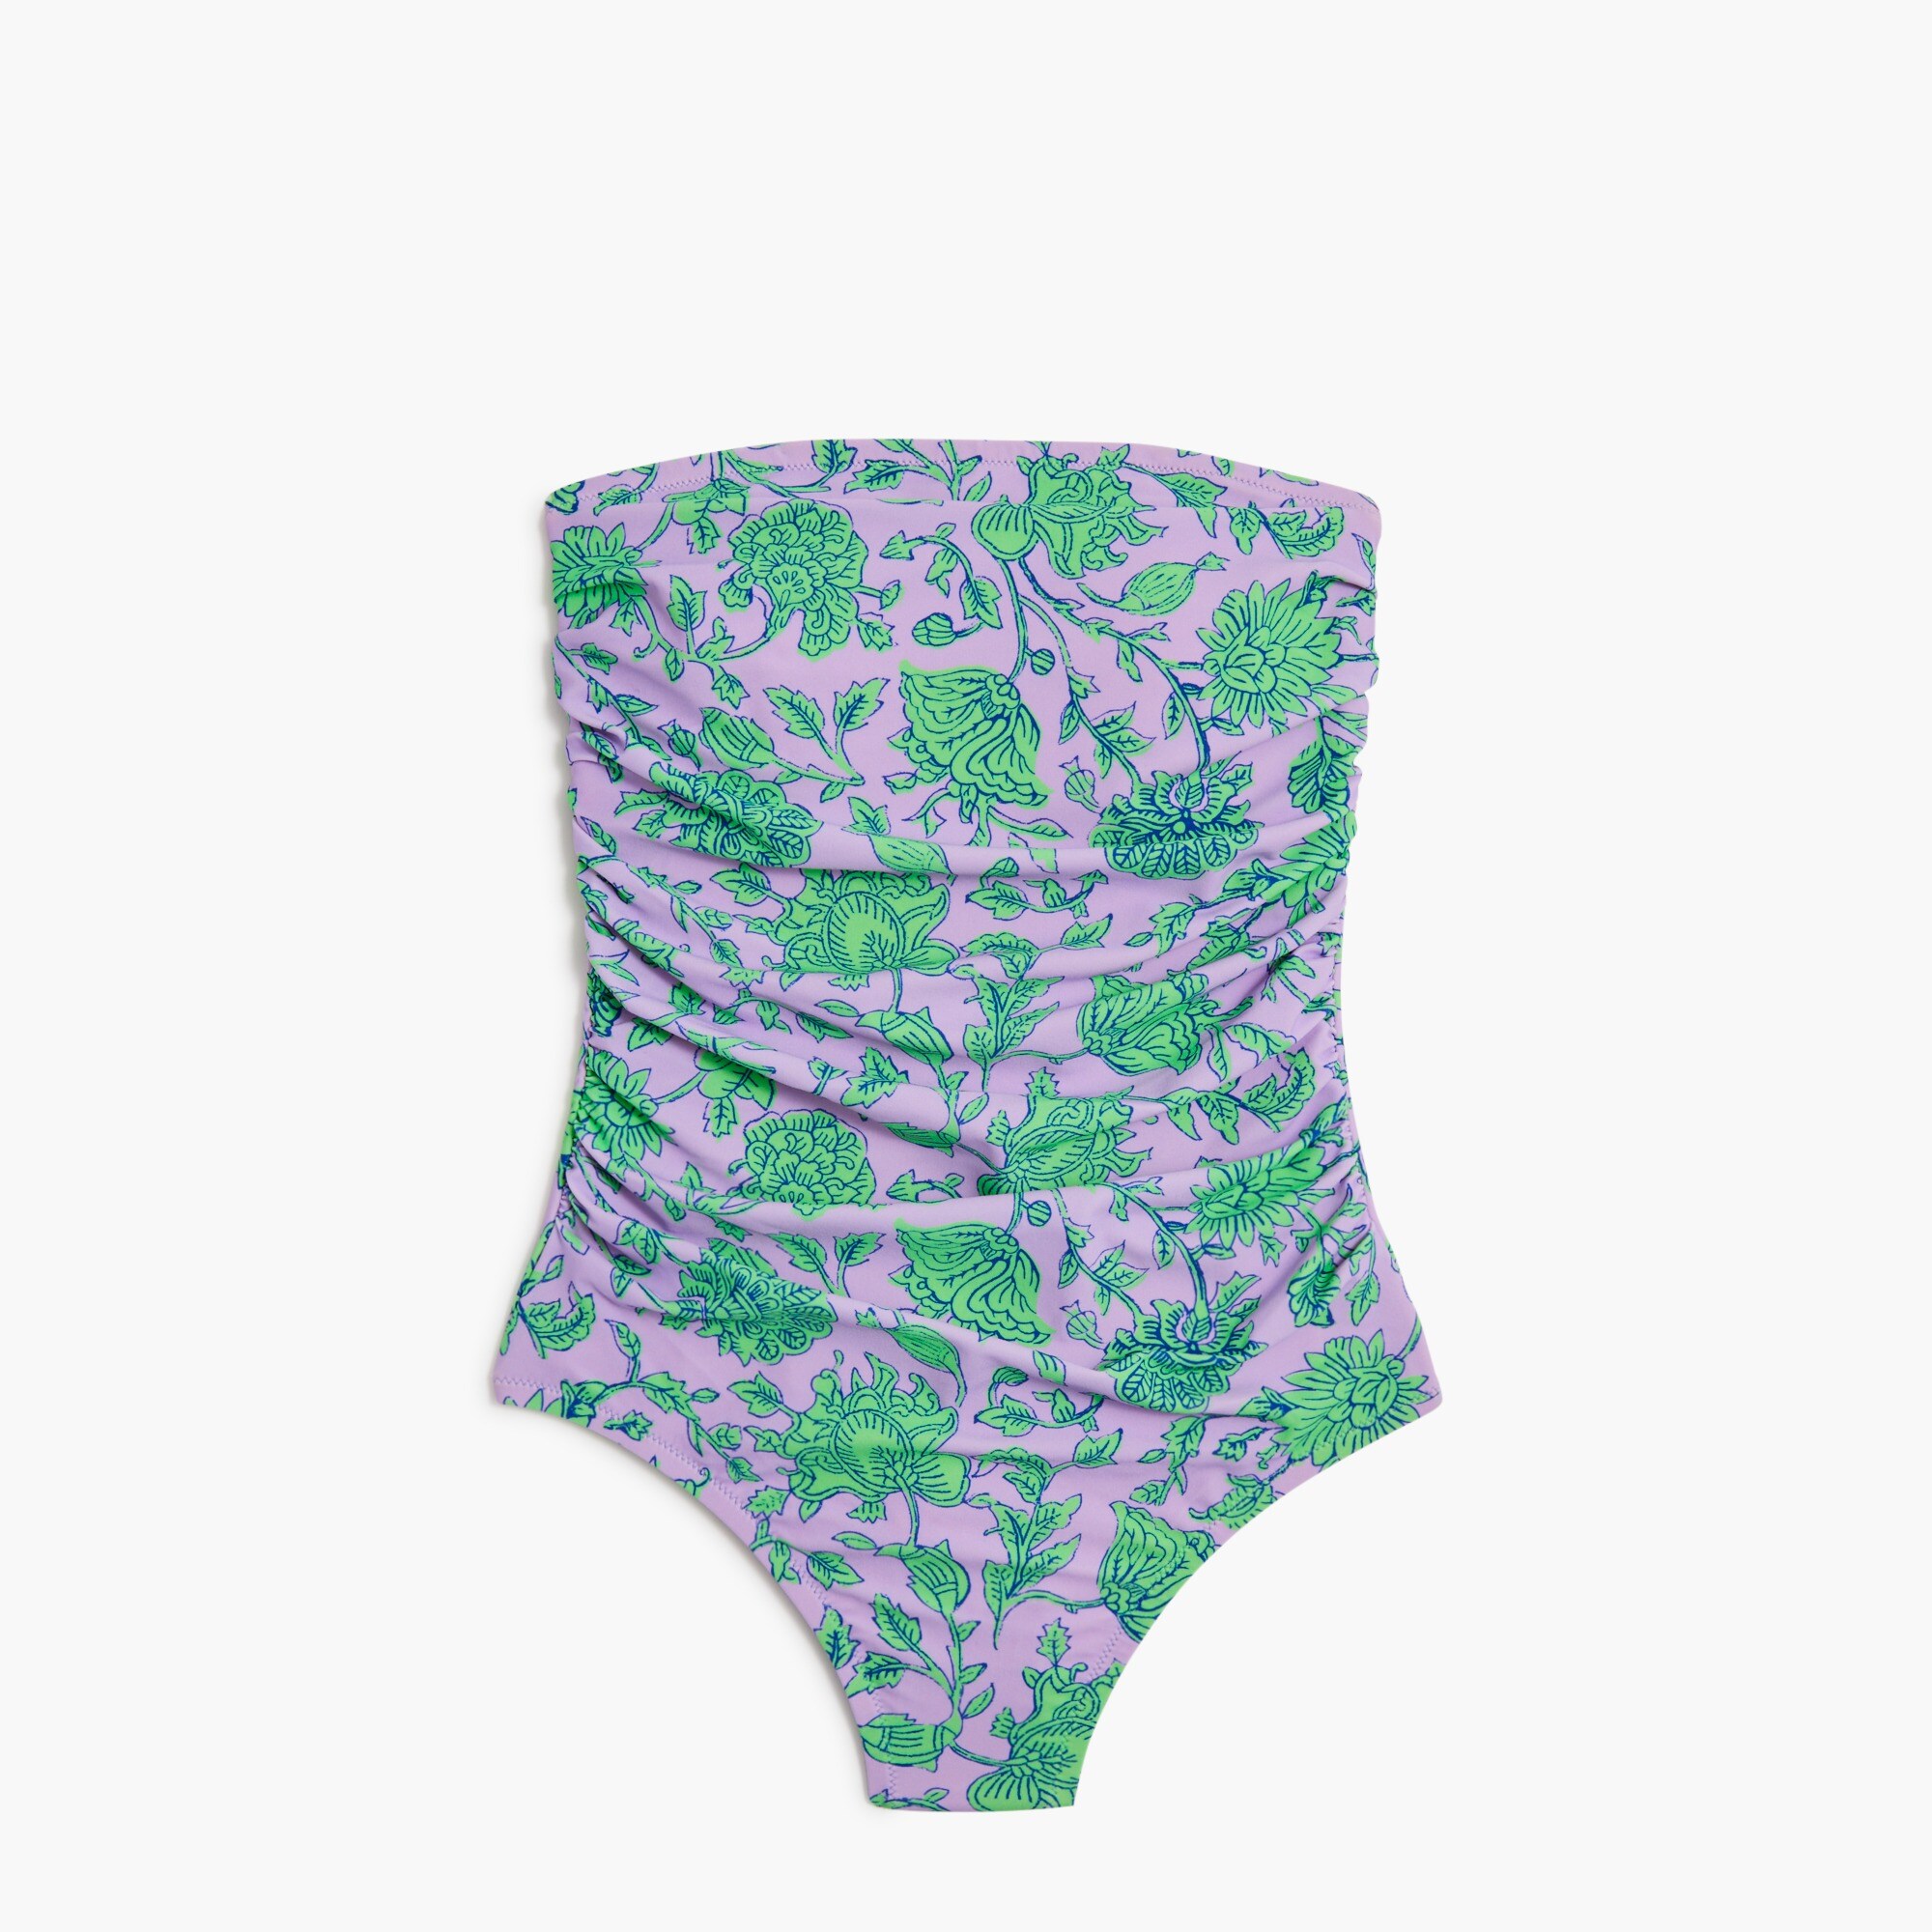  Printed strapless one-piece swimsuit